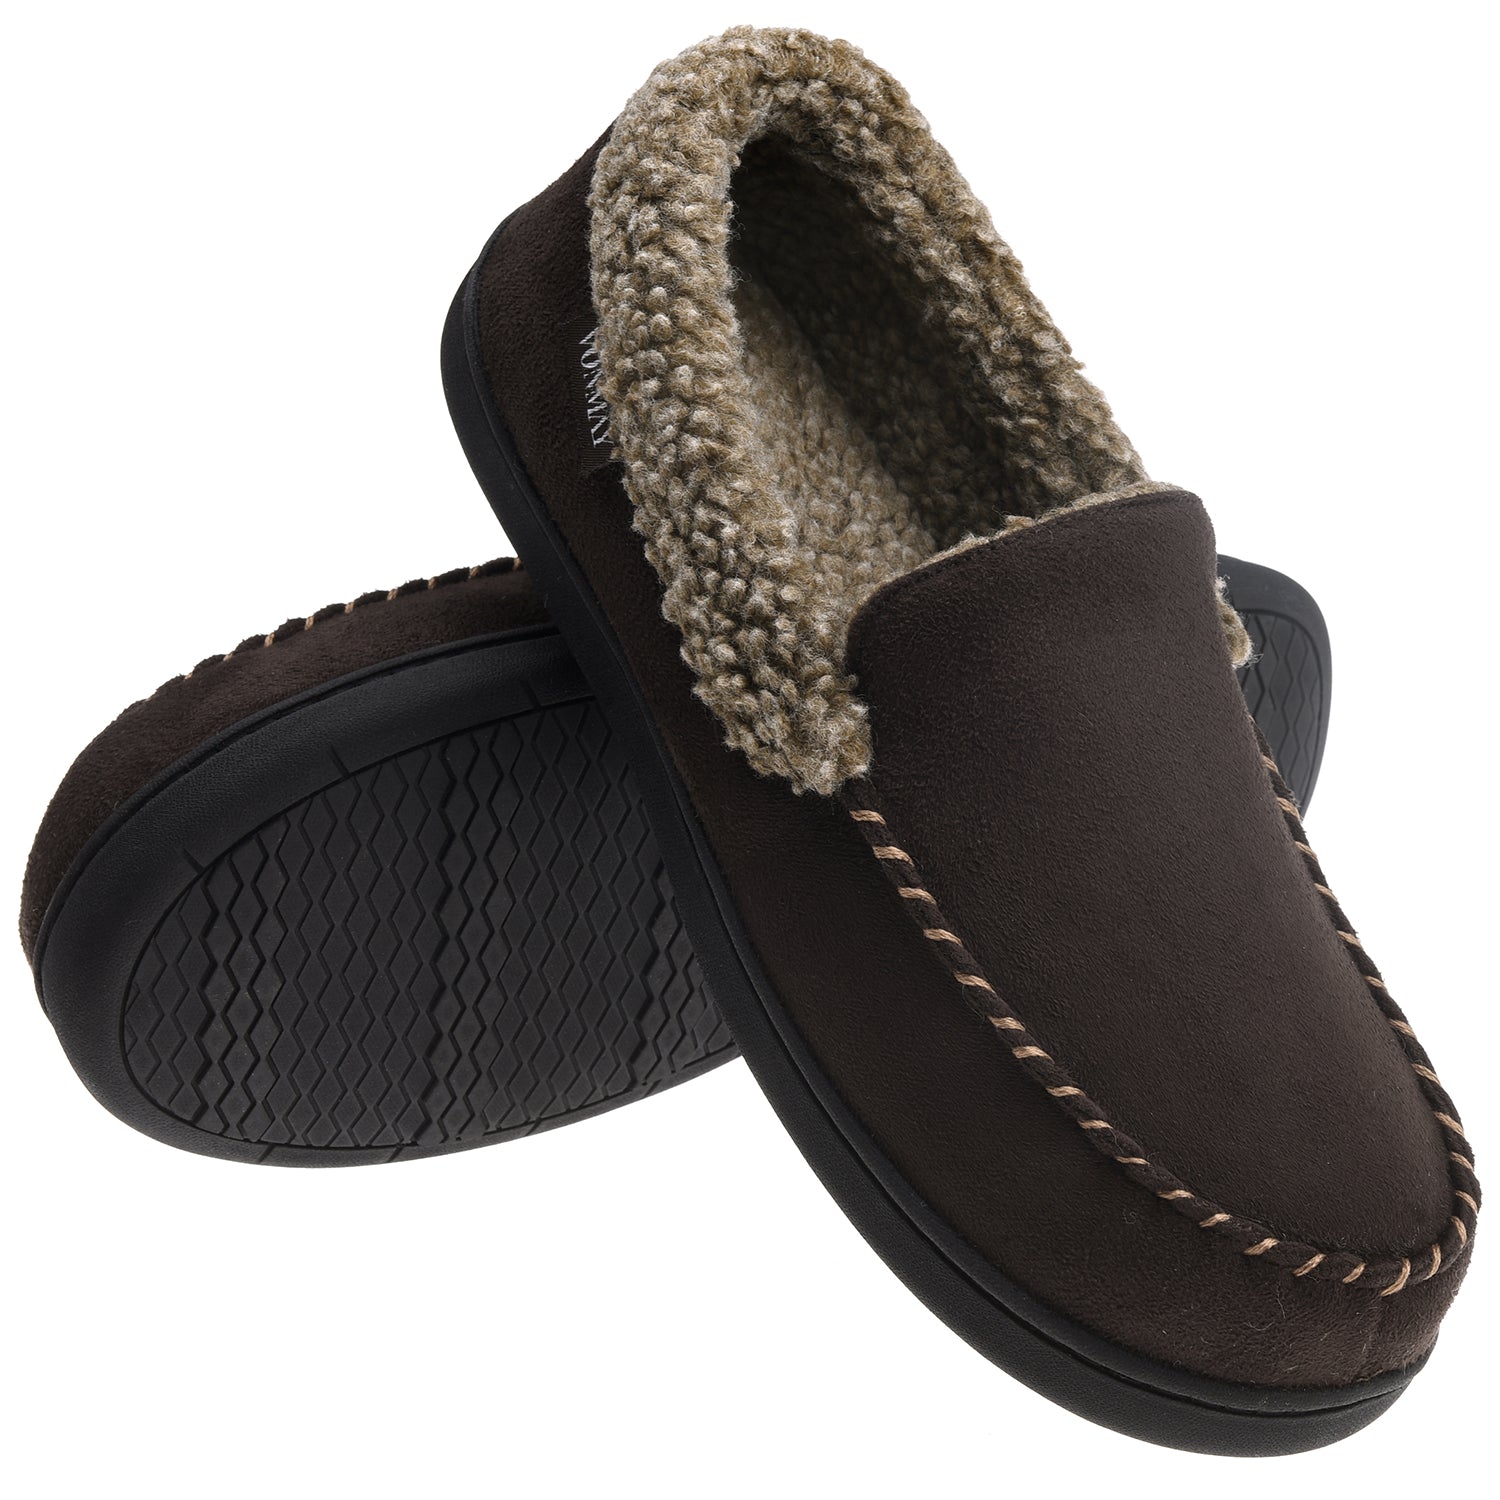 moccasin house slippers